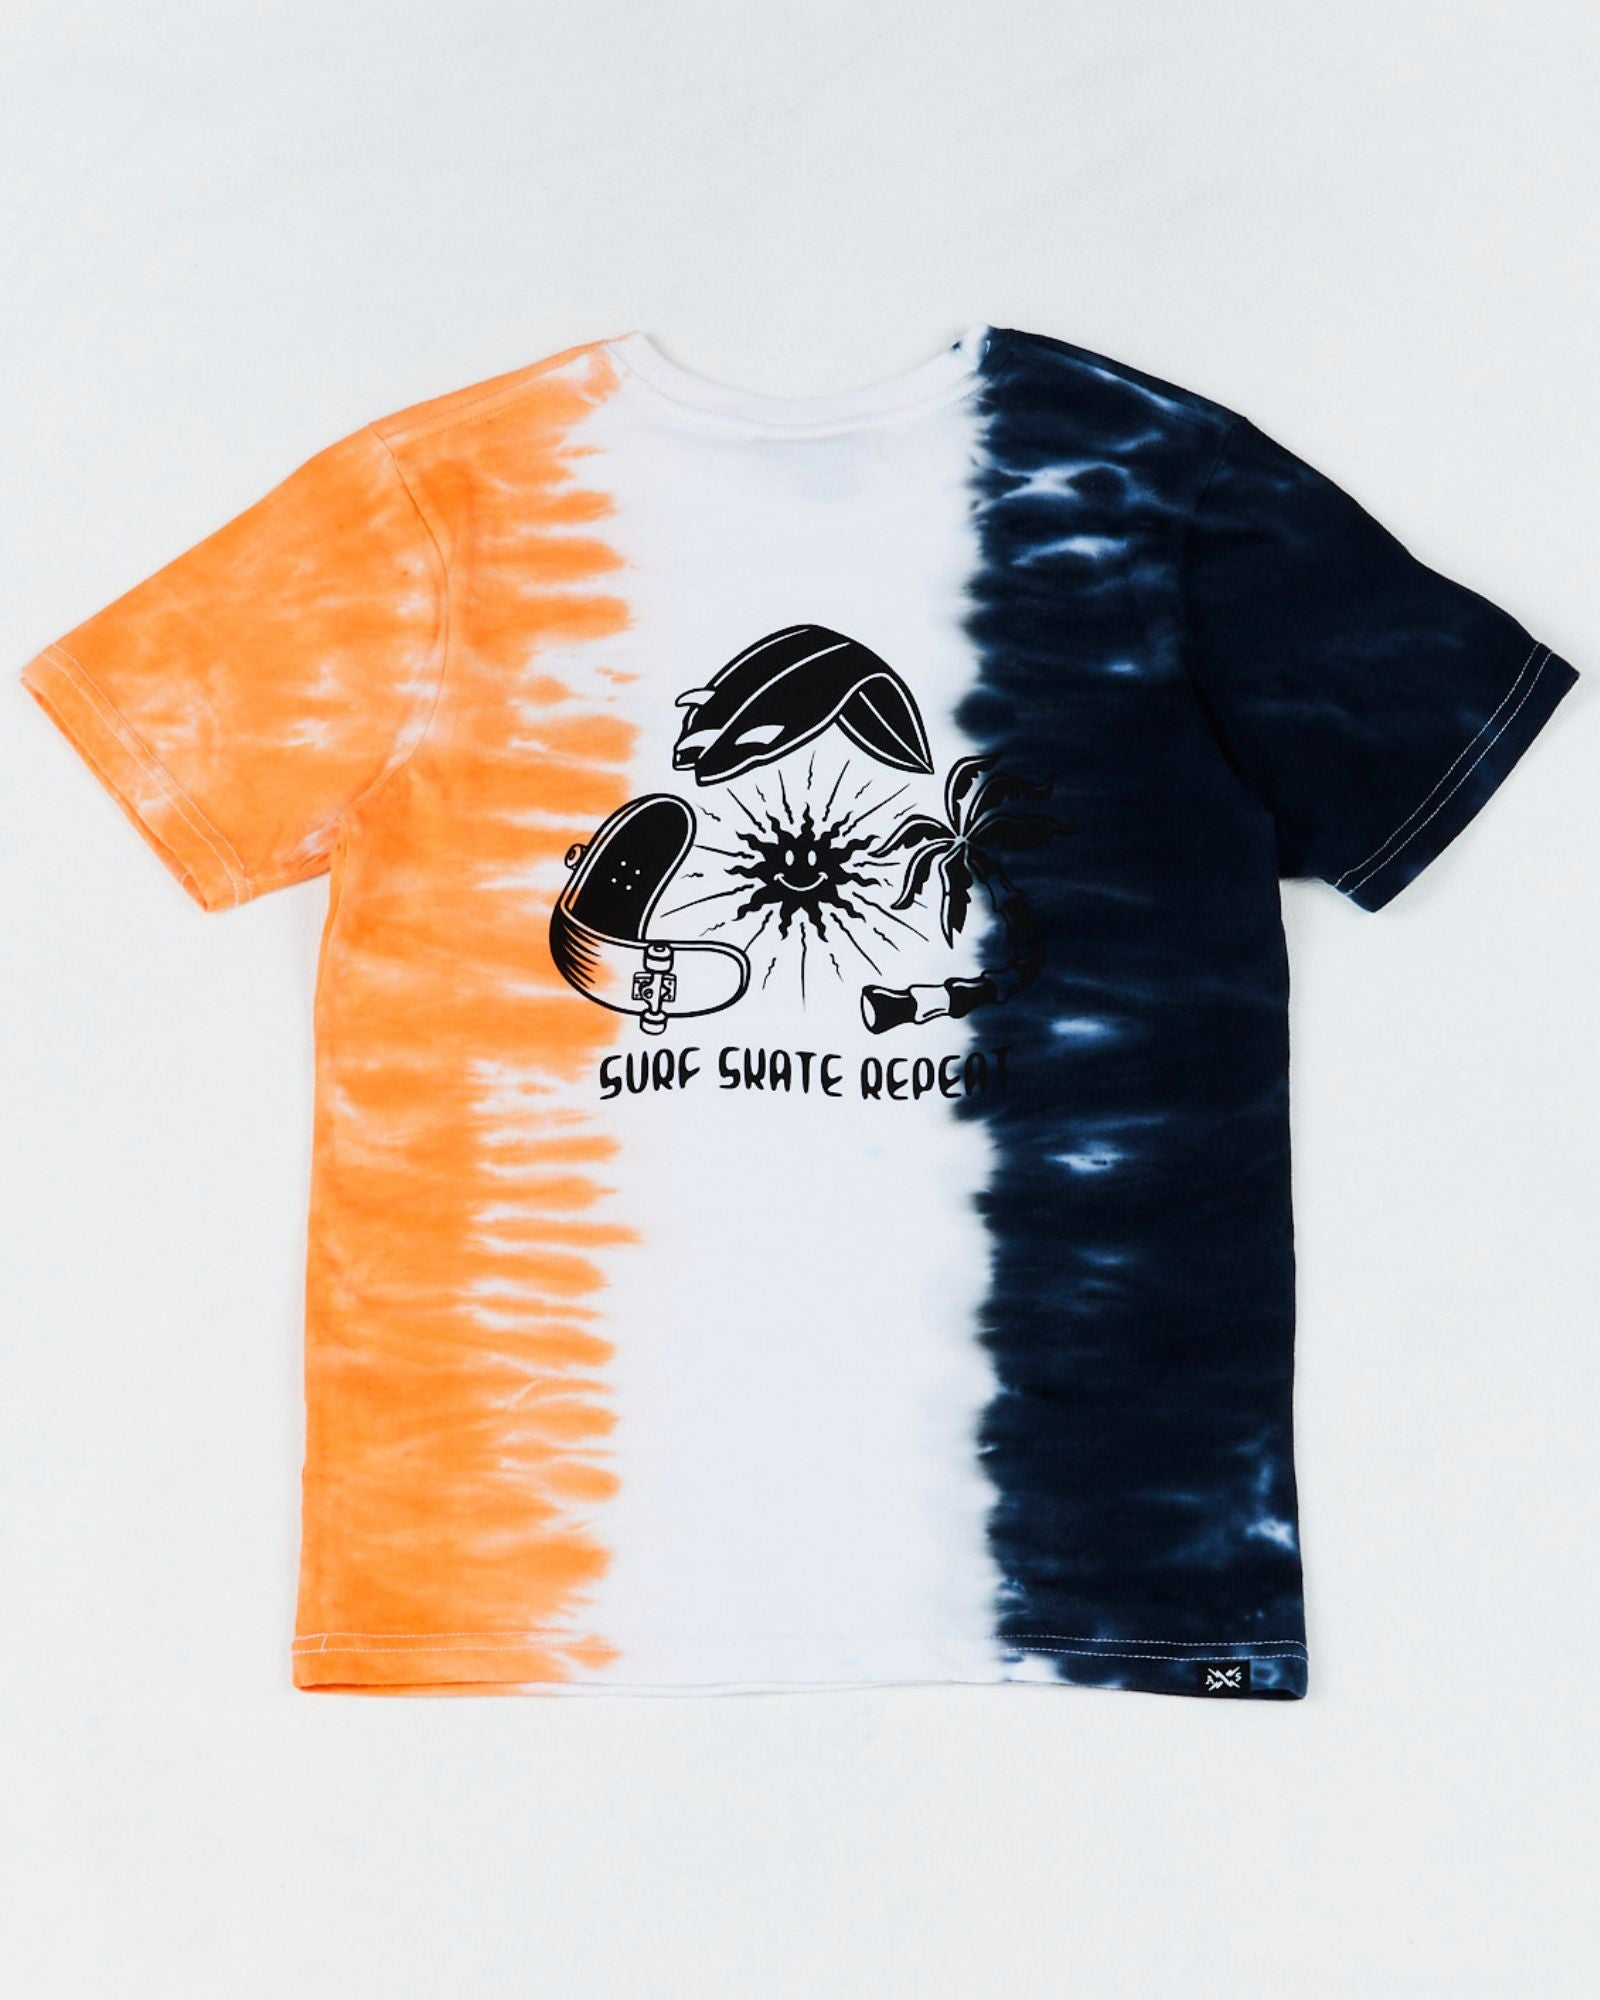 Alphabet Soup's Teen Double Dip Short Sleeve for boys 8-16. This Tee boasts a fun 'Surf Skate Repeat' print and 3-tone dip-dye in orange, navy and white. Features regular fit, straight hemline, and a soft ribbed crew neckline in 100% cotton.